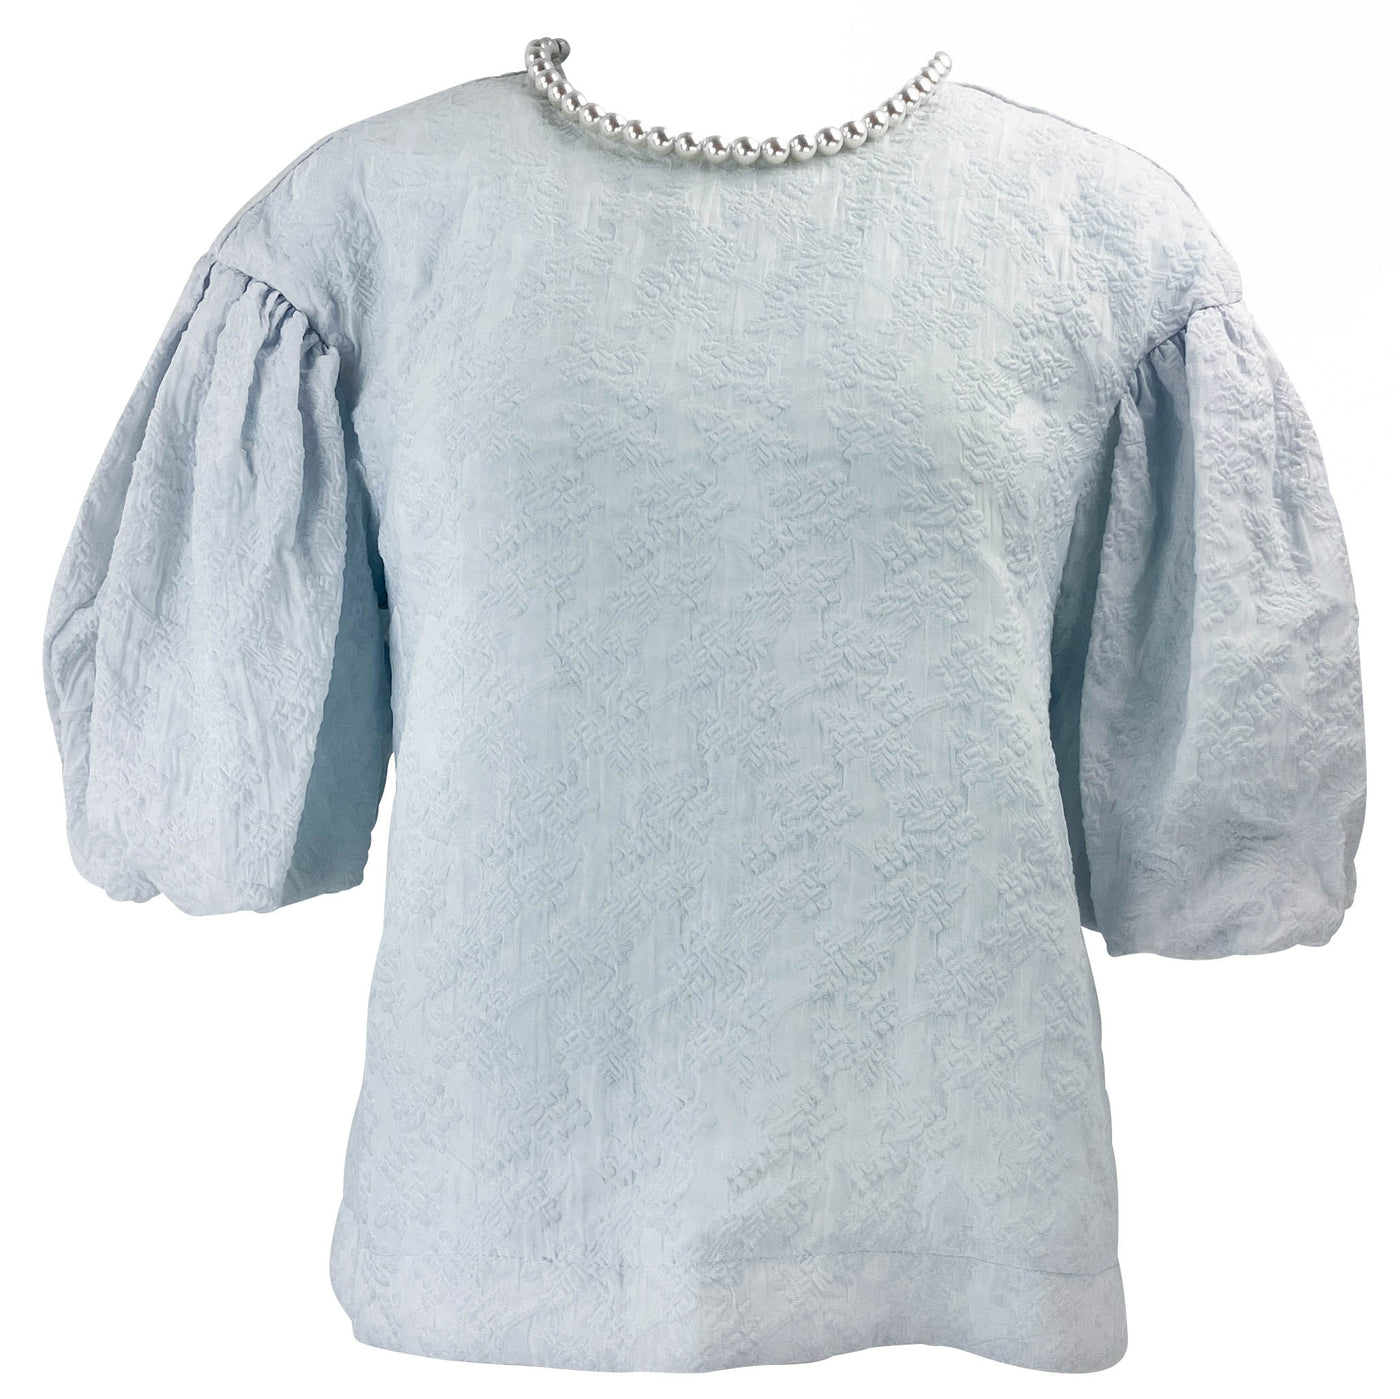 Simone Rocha Puff Sleeve Blouse with Pearl Detail in Pale Blue - Discounts on Simone Rocha at UAL